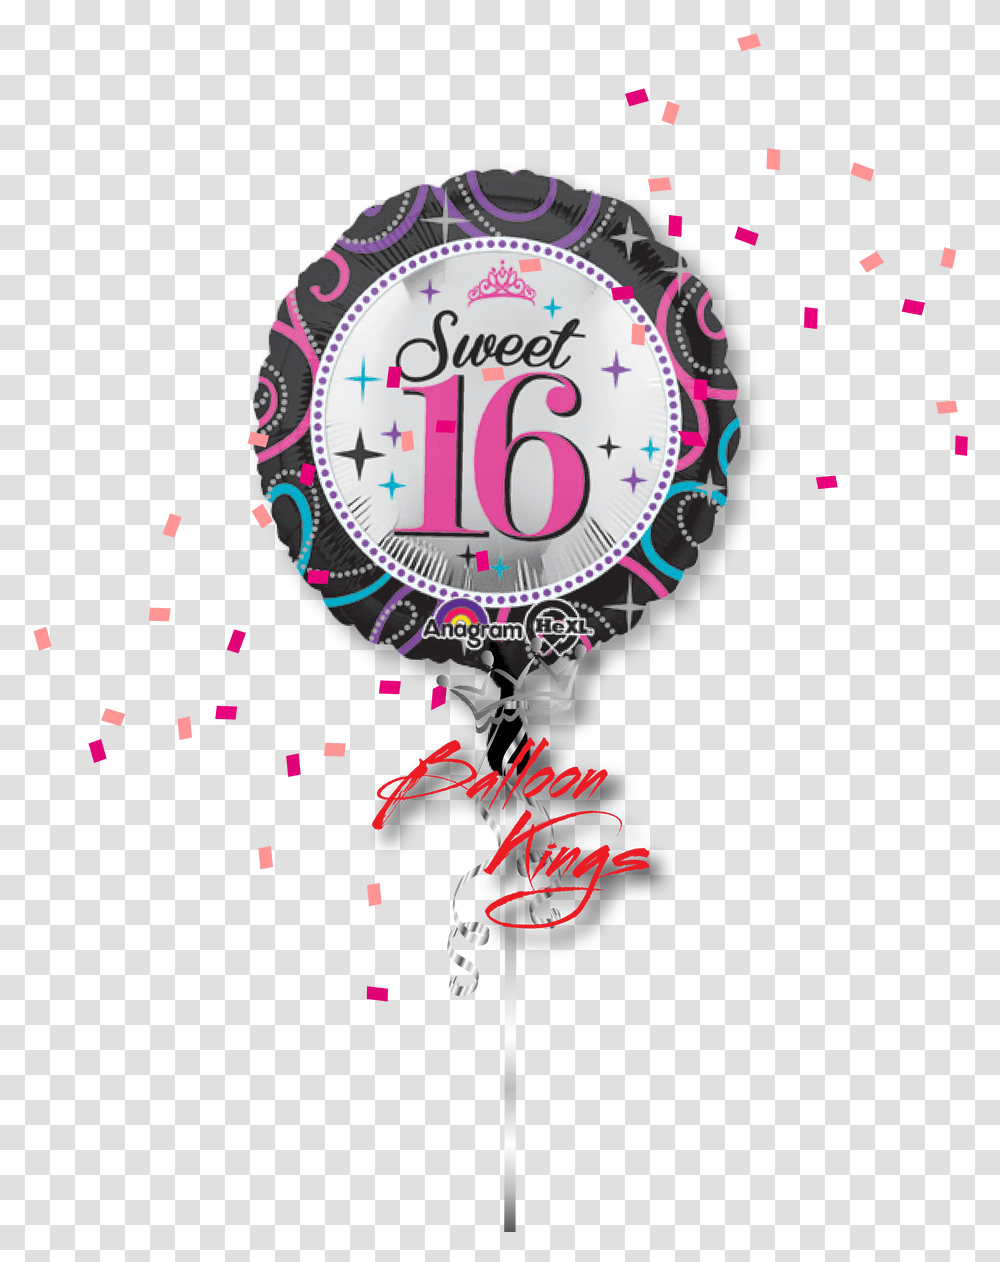 Sweet 16 Round Sweet, Paper, Confetti, Clock Tower, Architecture Transparent Png